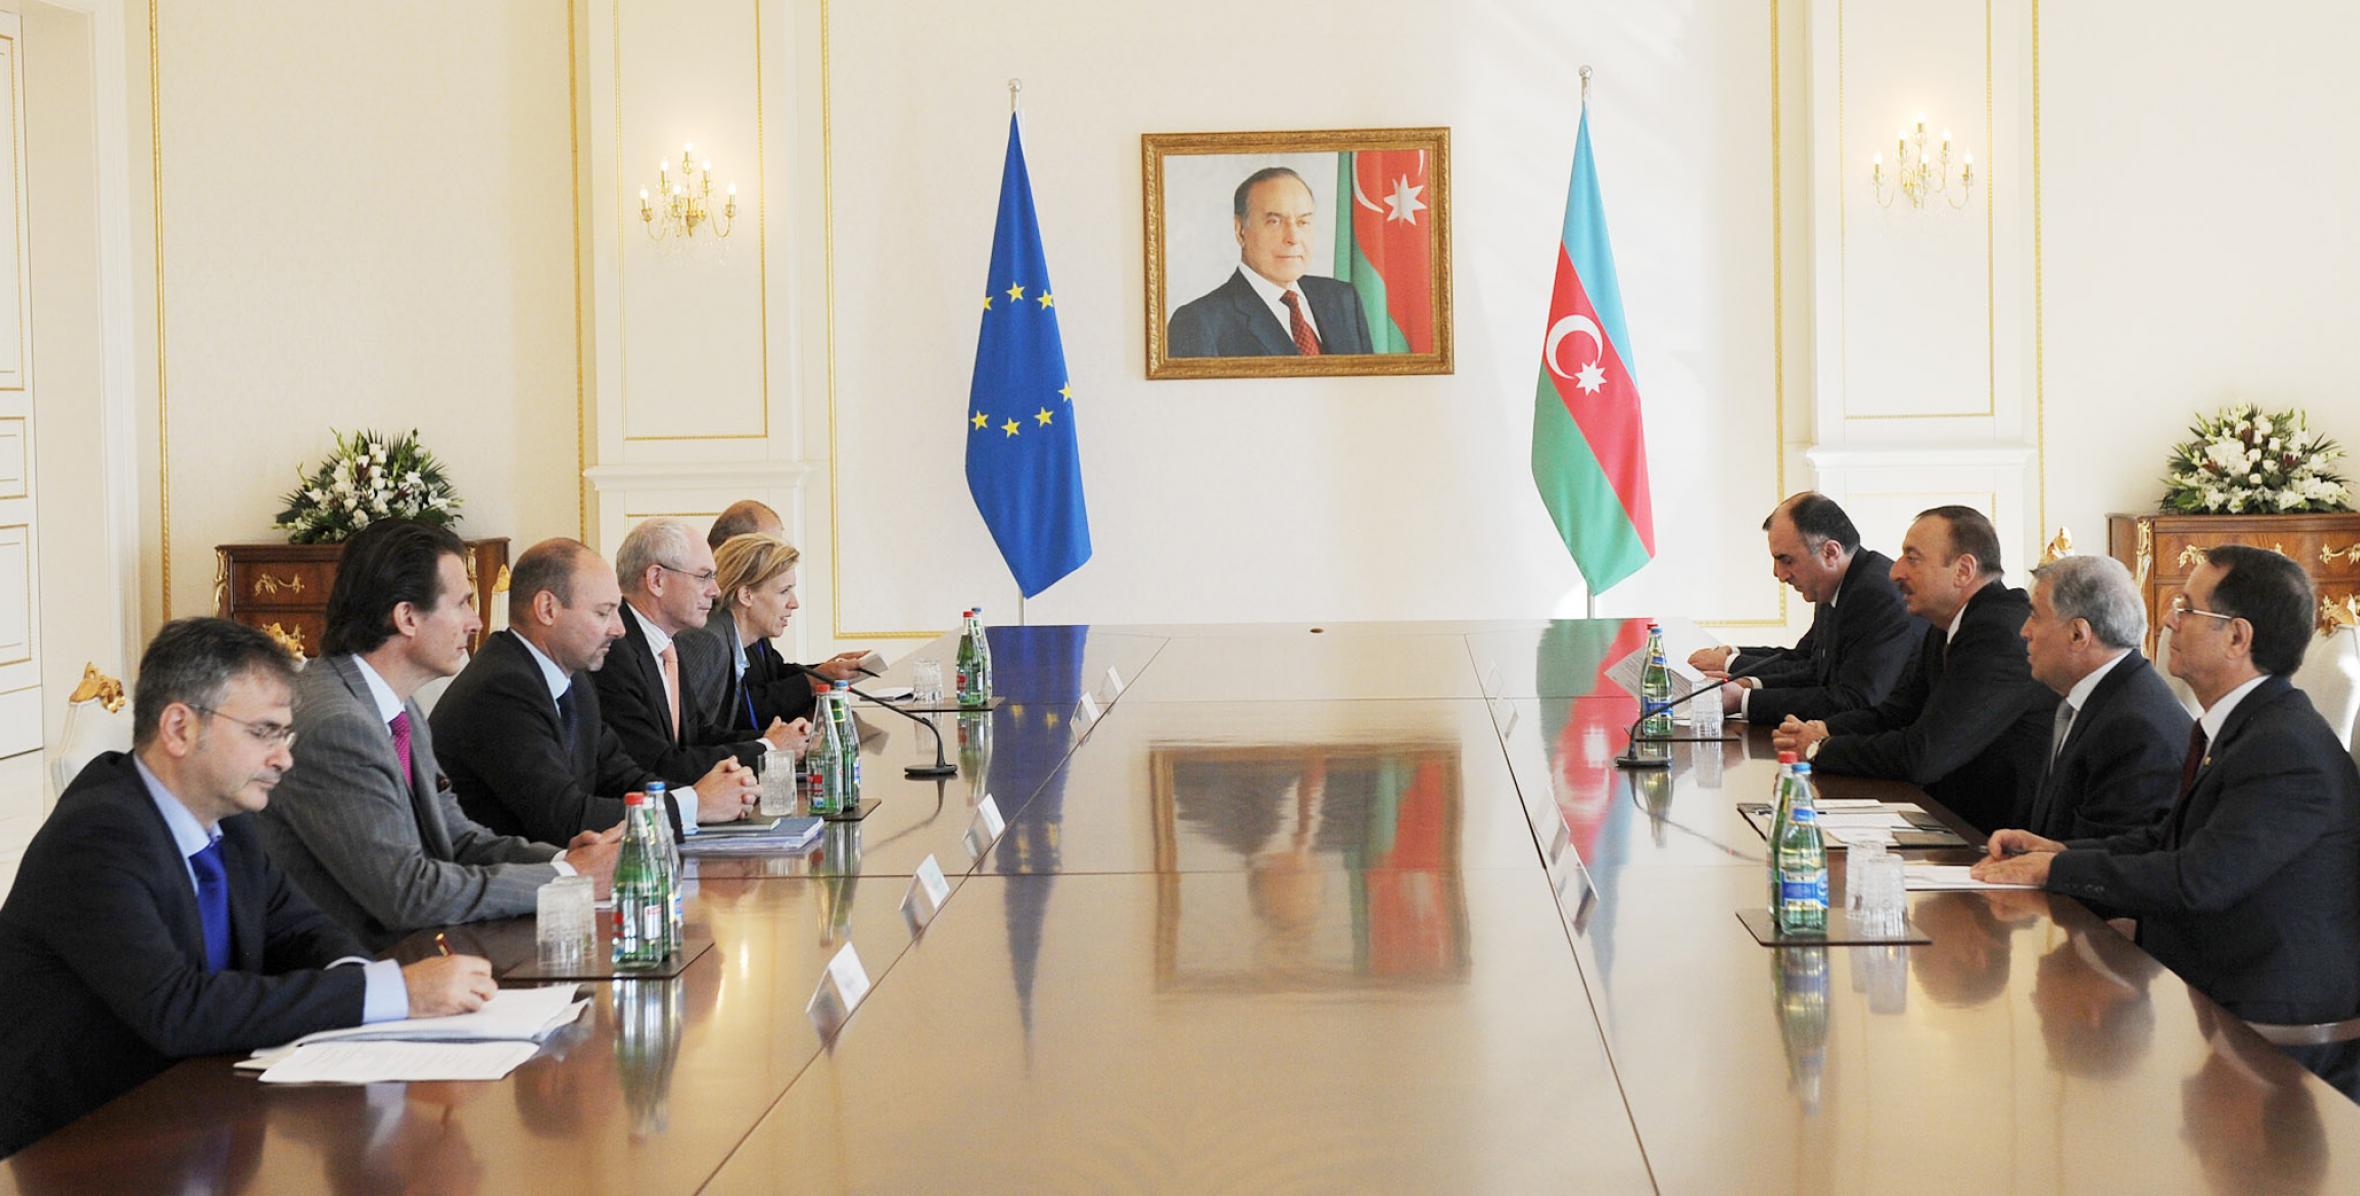 Presidents of Azerbaijan and European Council held a meeting in an expanded format